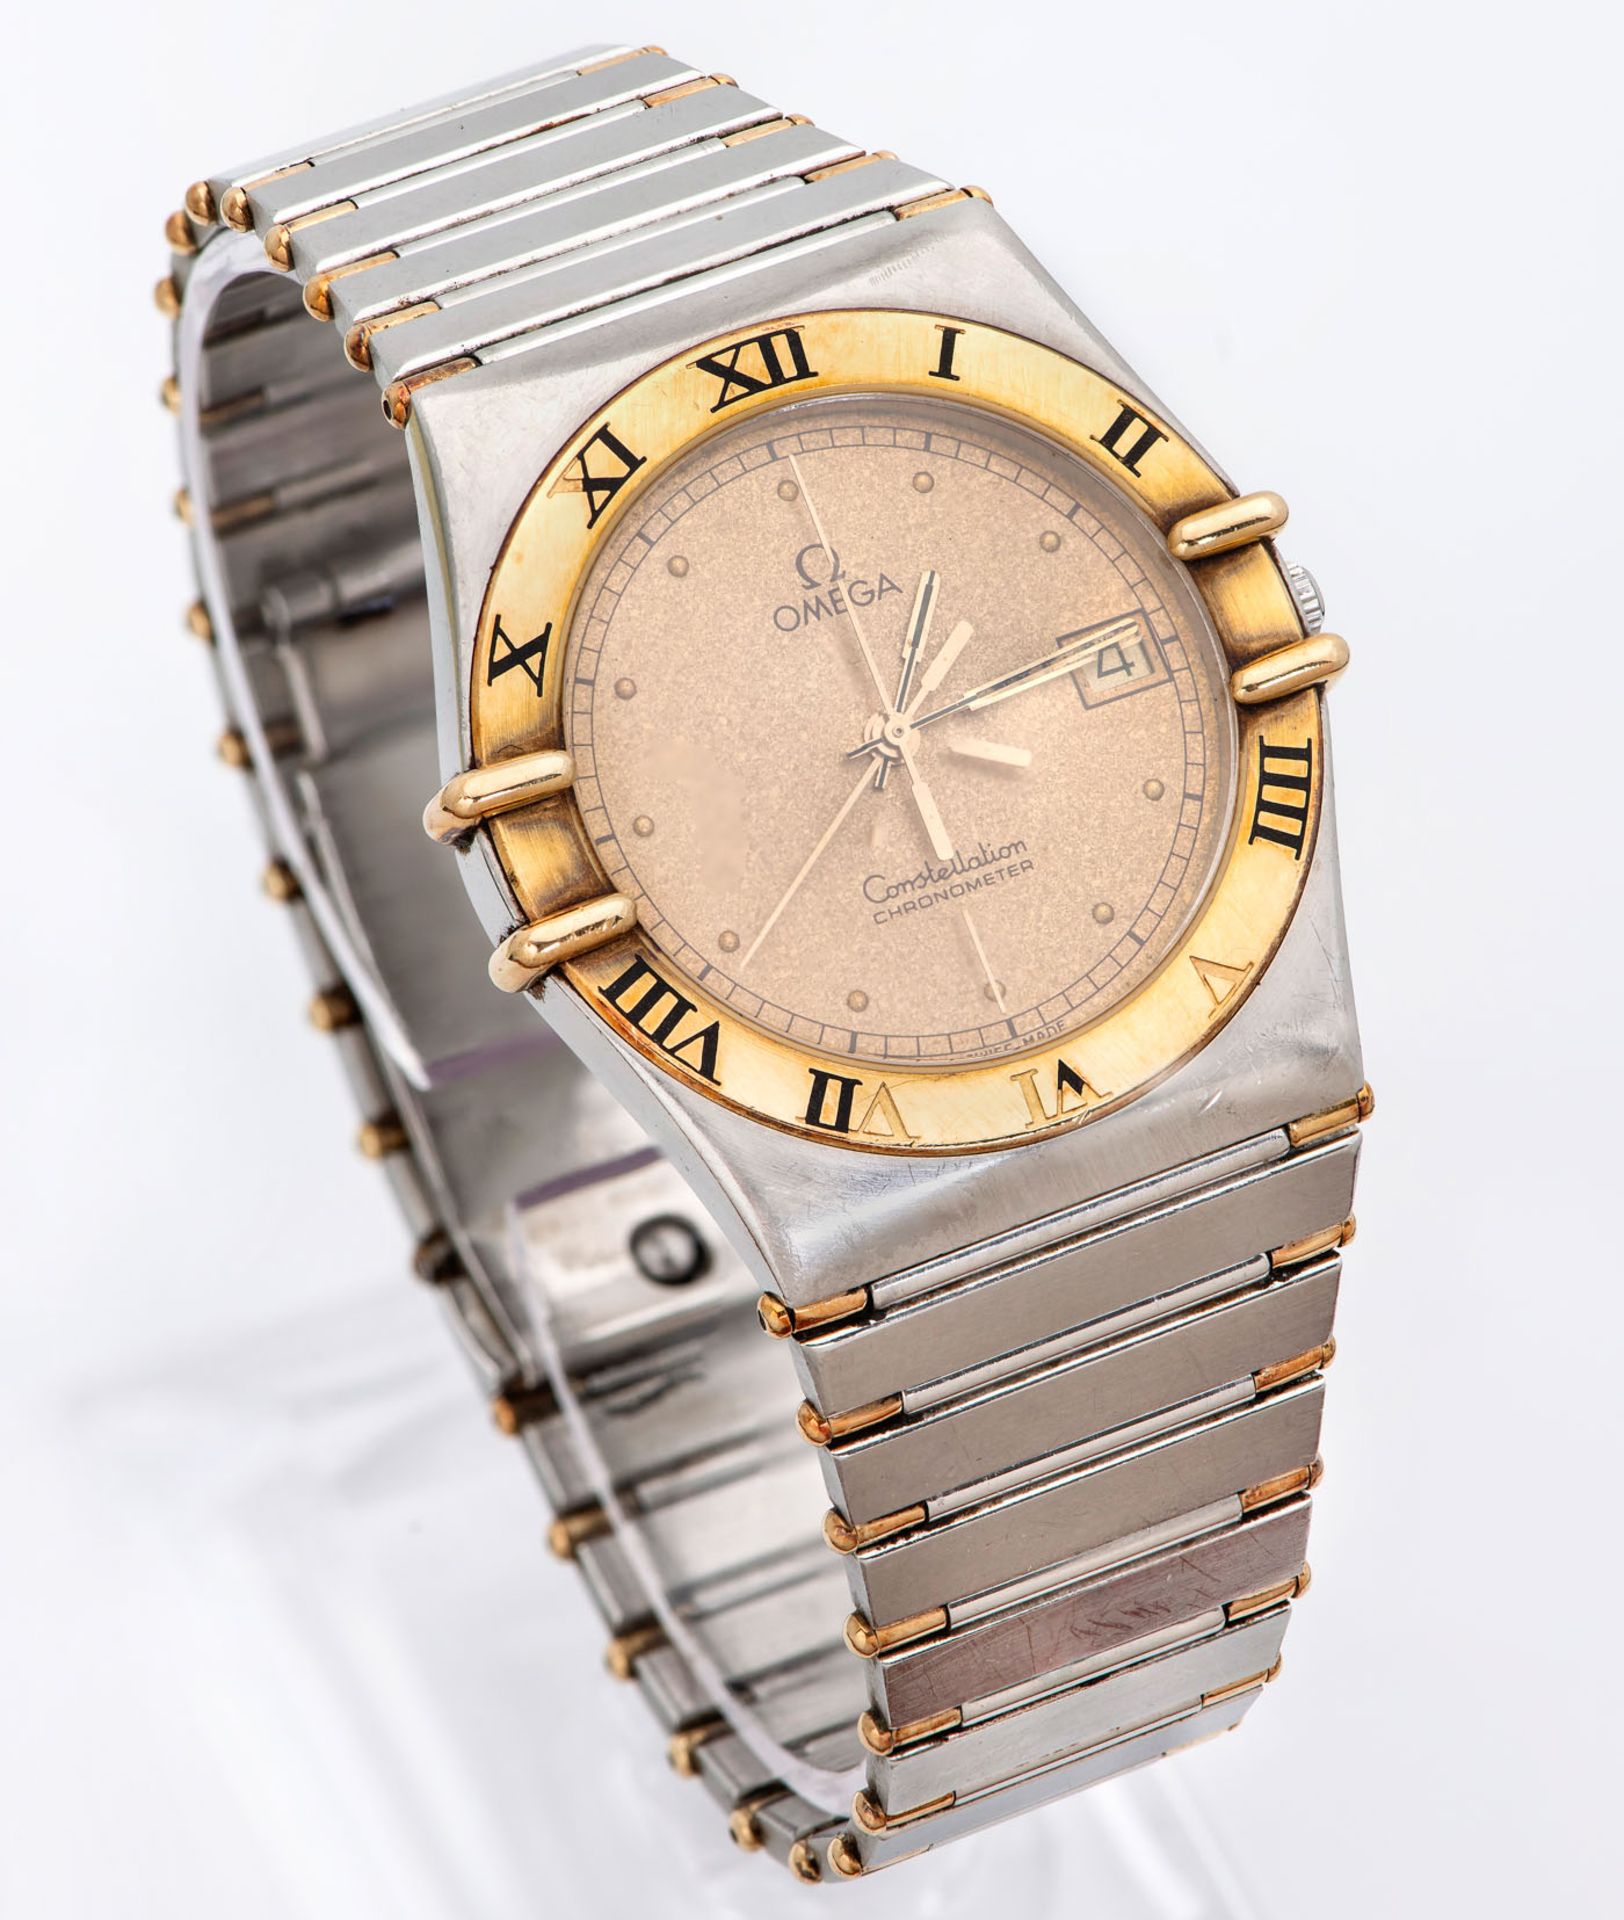 An Omega Constellation Chronometer 18k Gold and Stainless Steel Wristwatch - Image 3 of 3